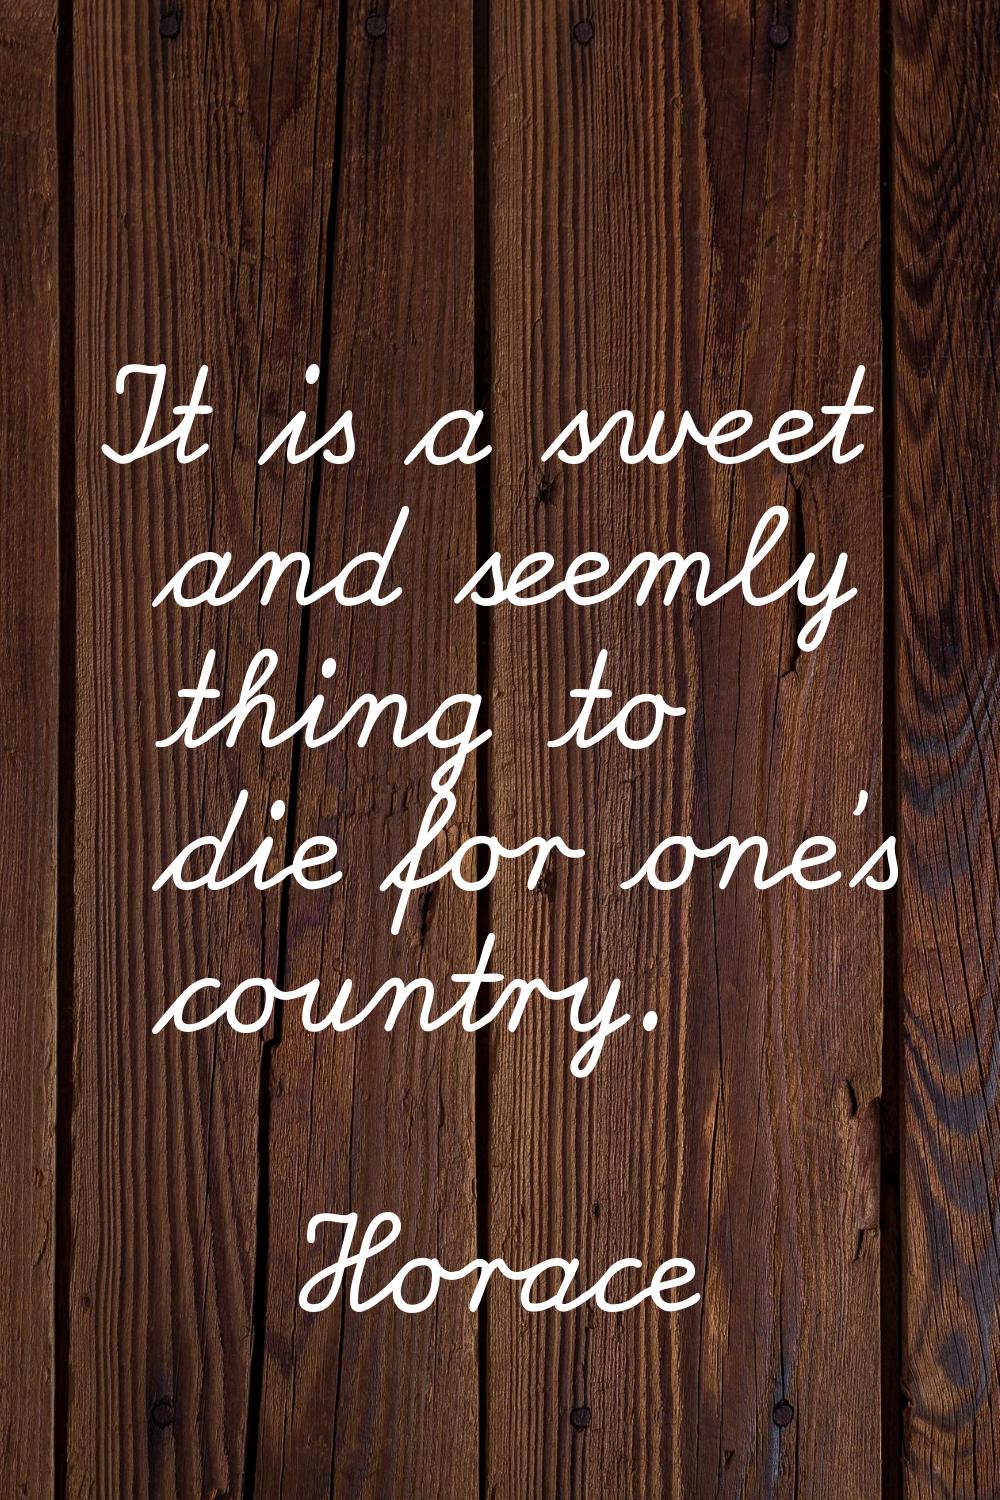 It is a sweet and seemly thing to die for one's country.